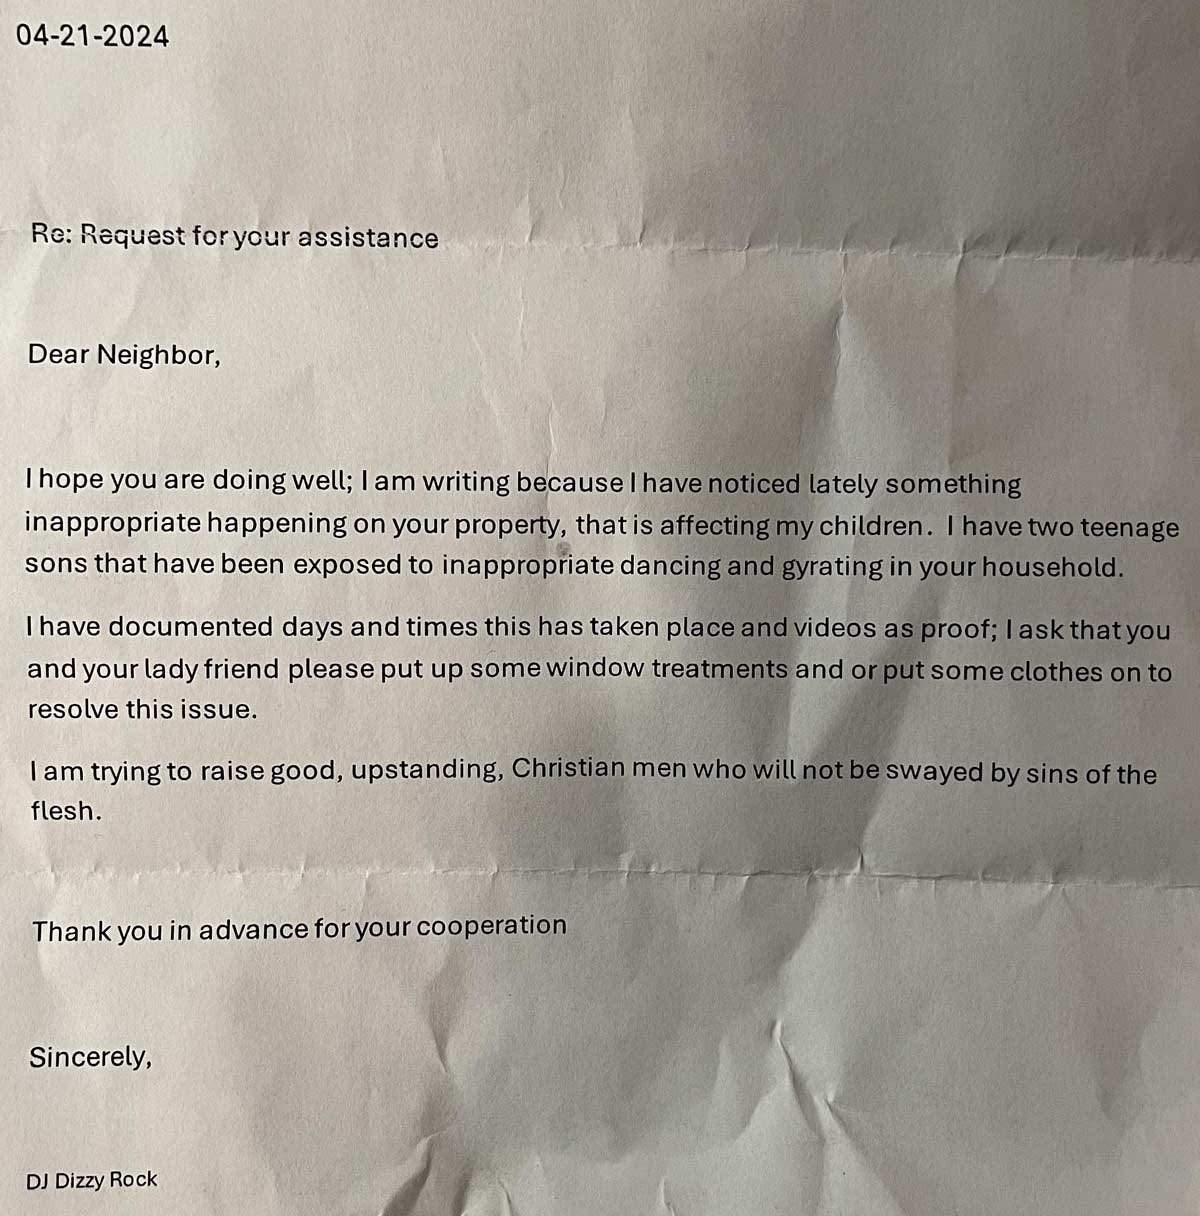 Letter from a concerned neighbor